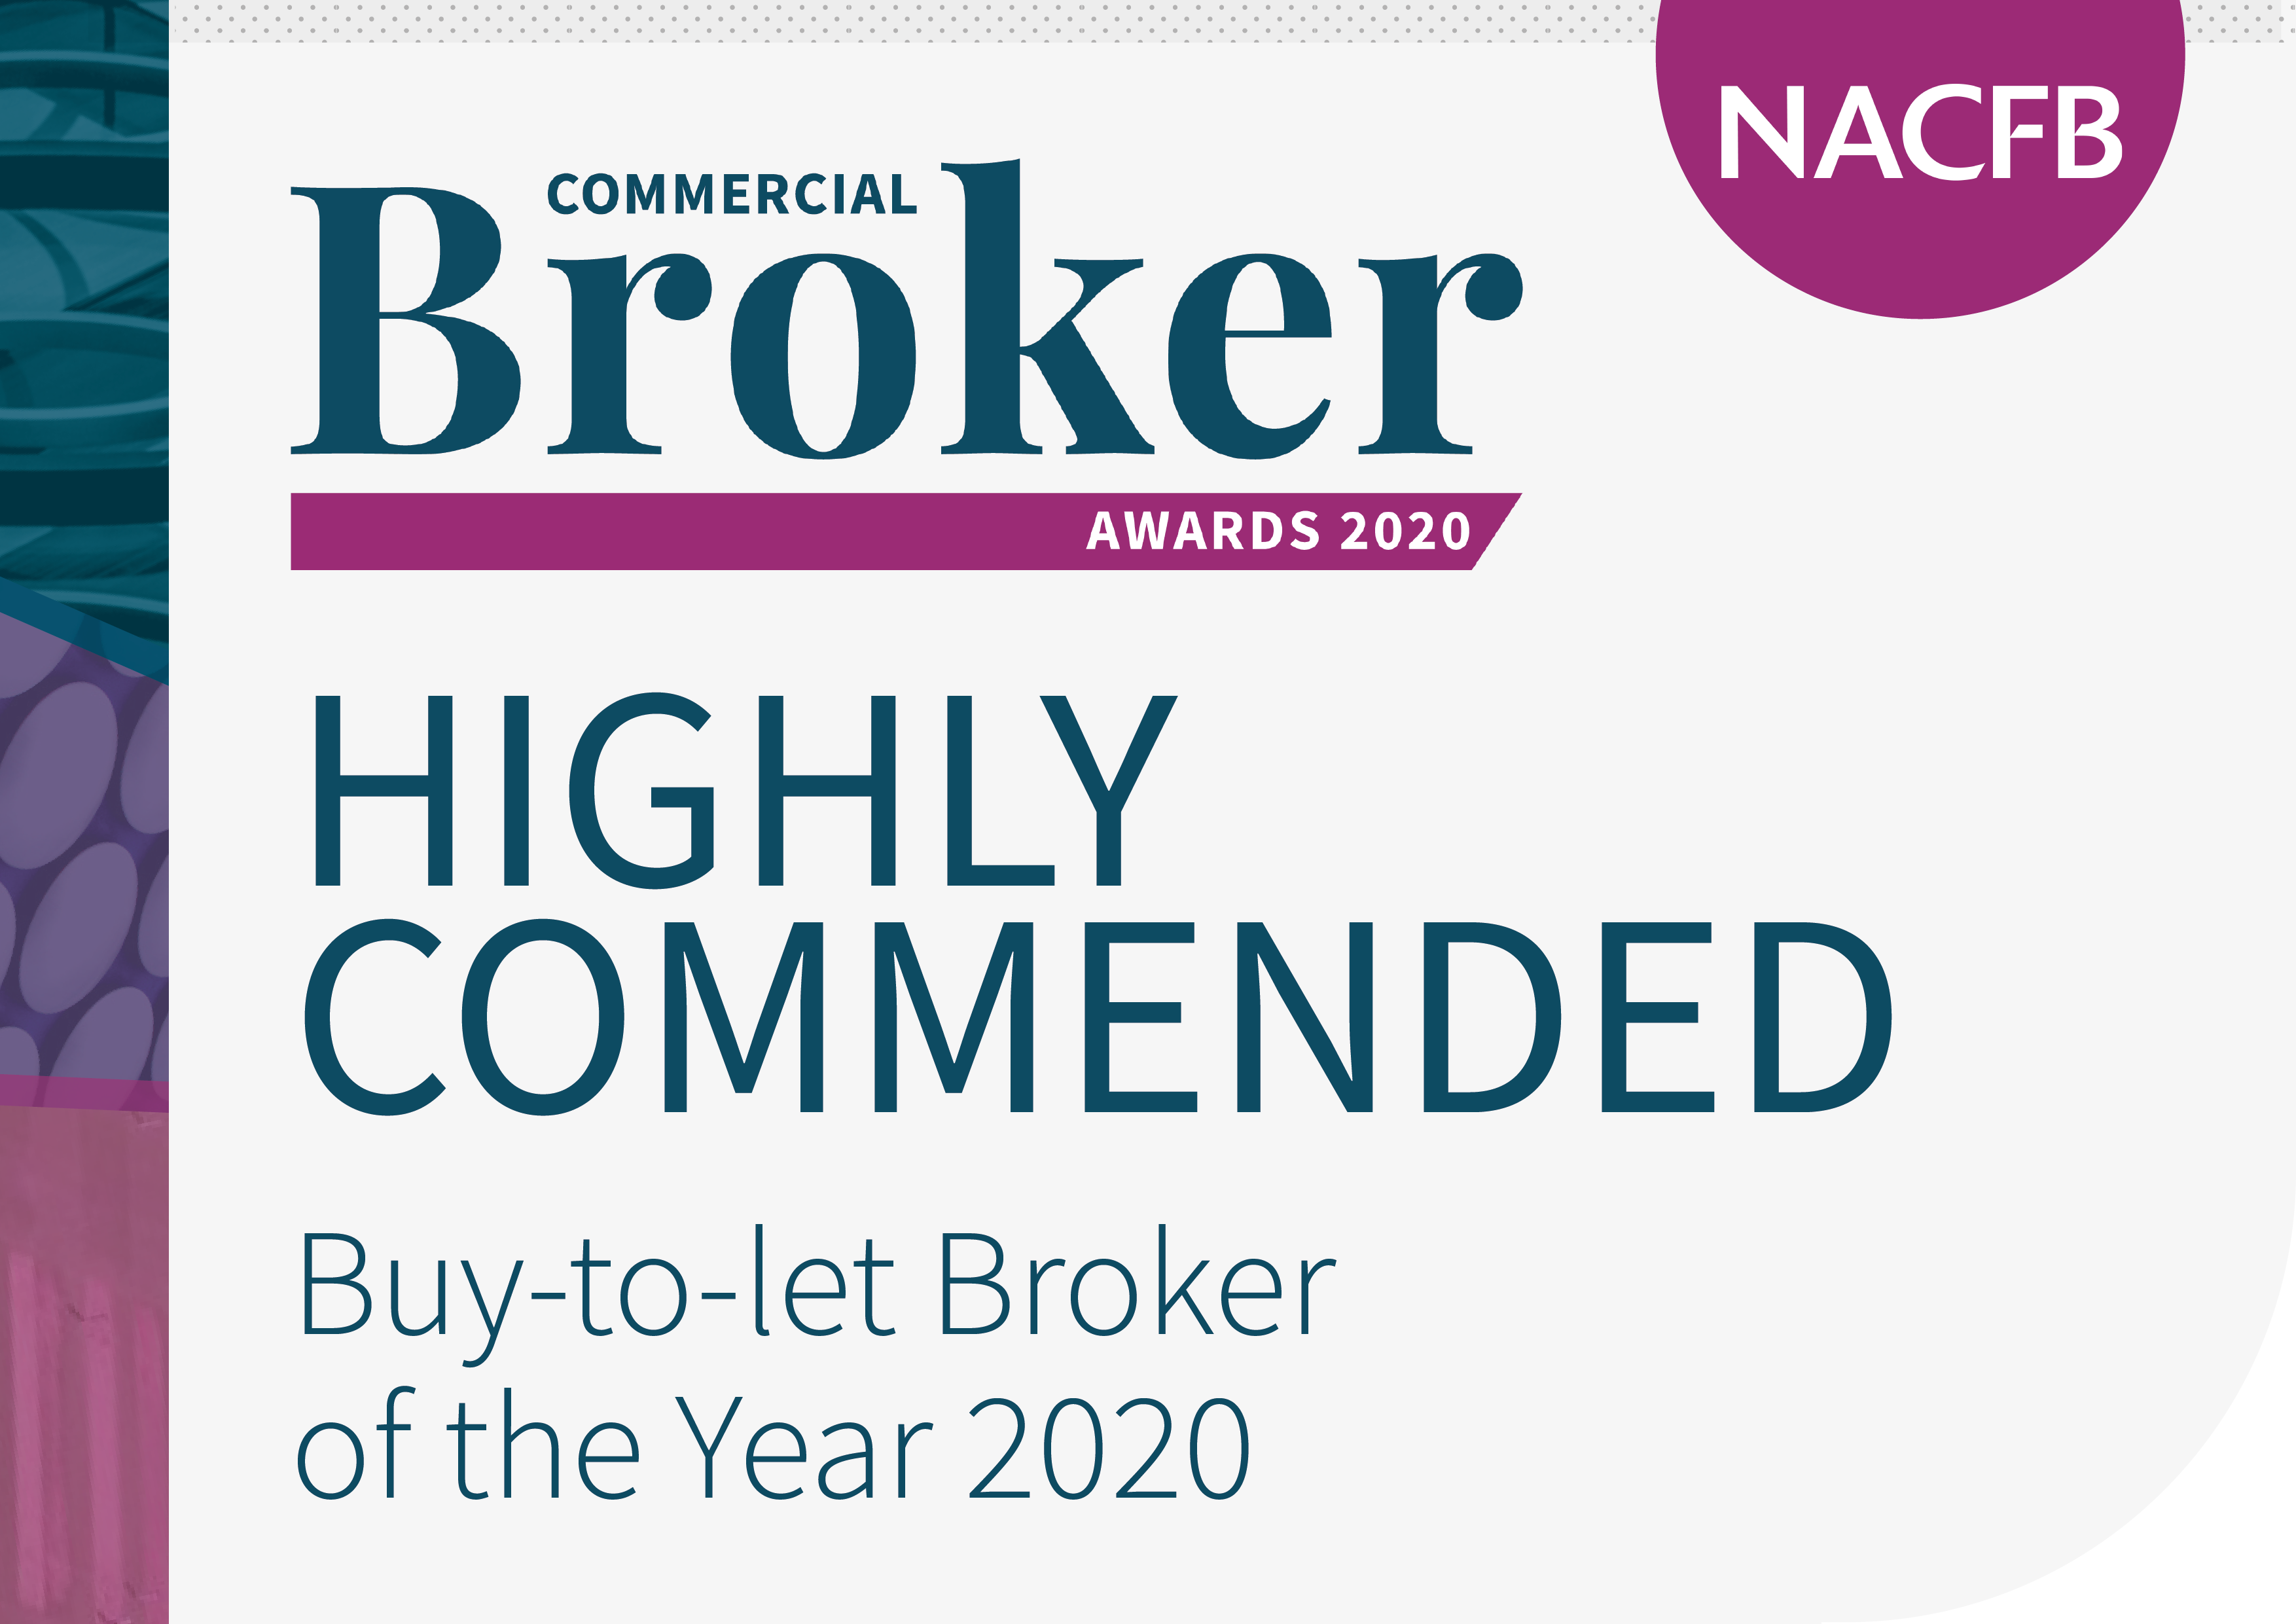 Highly Commended - Buy-to-let Broker of the Year 2020